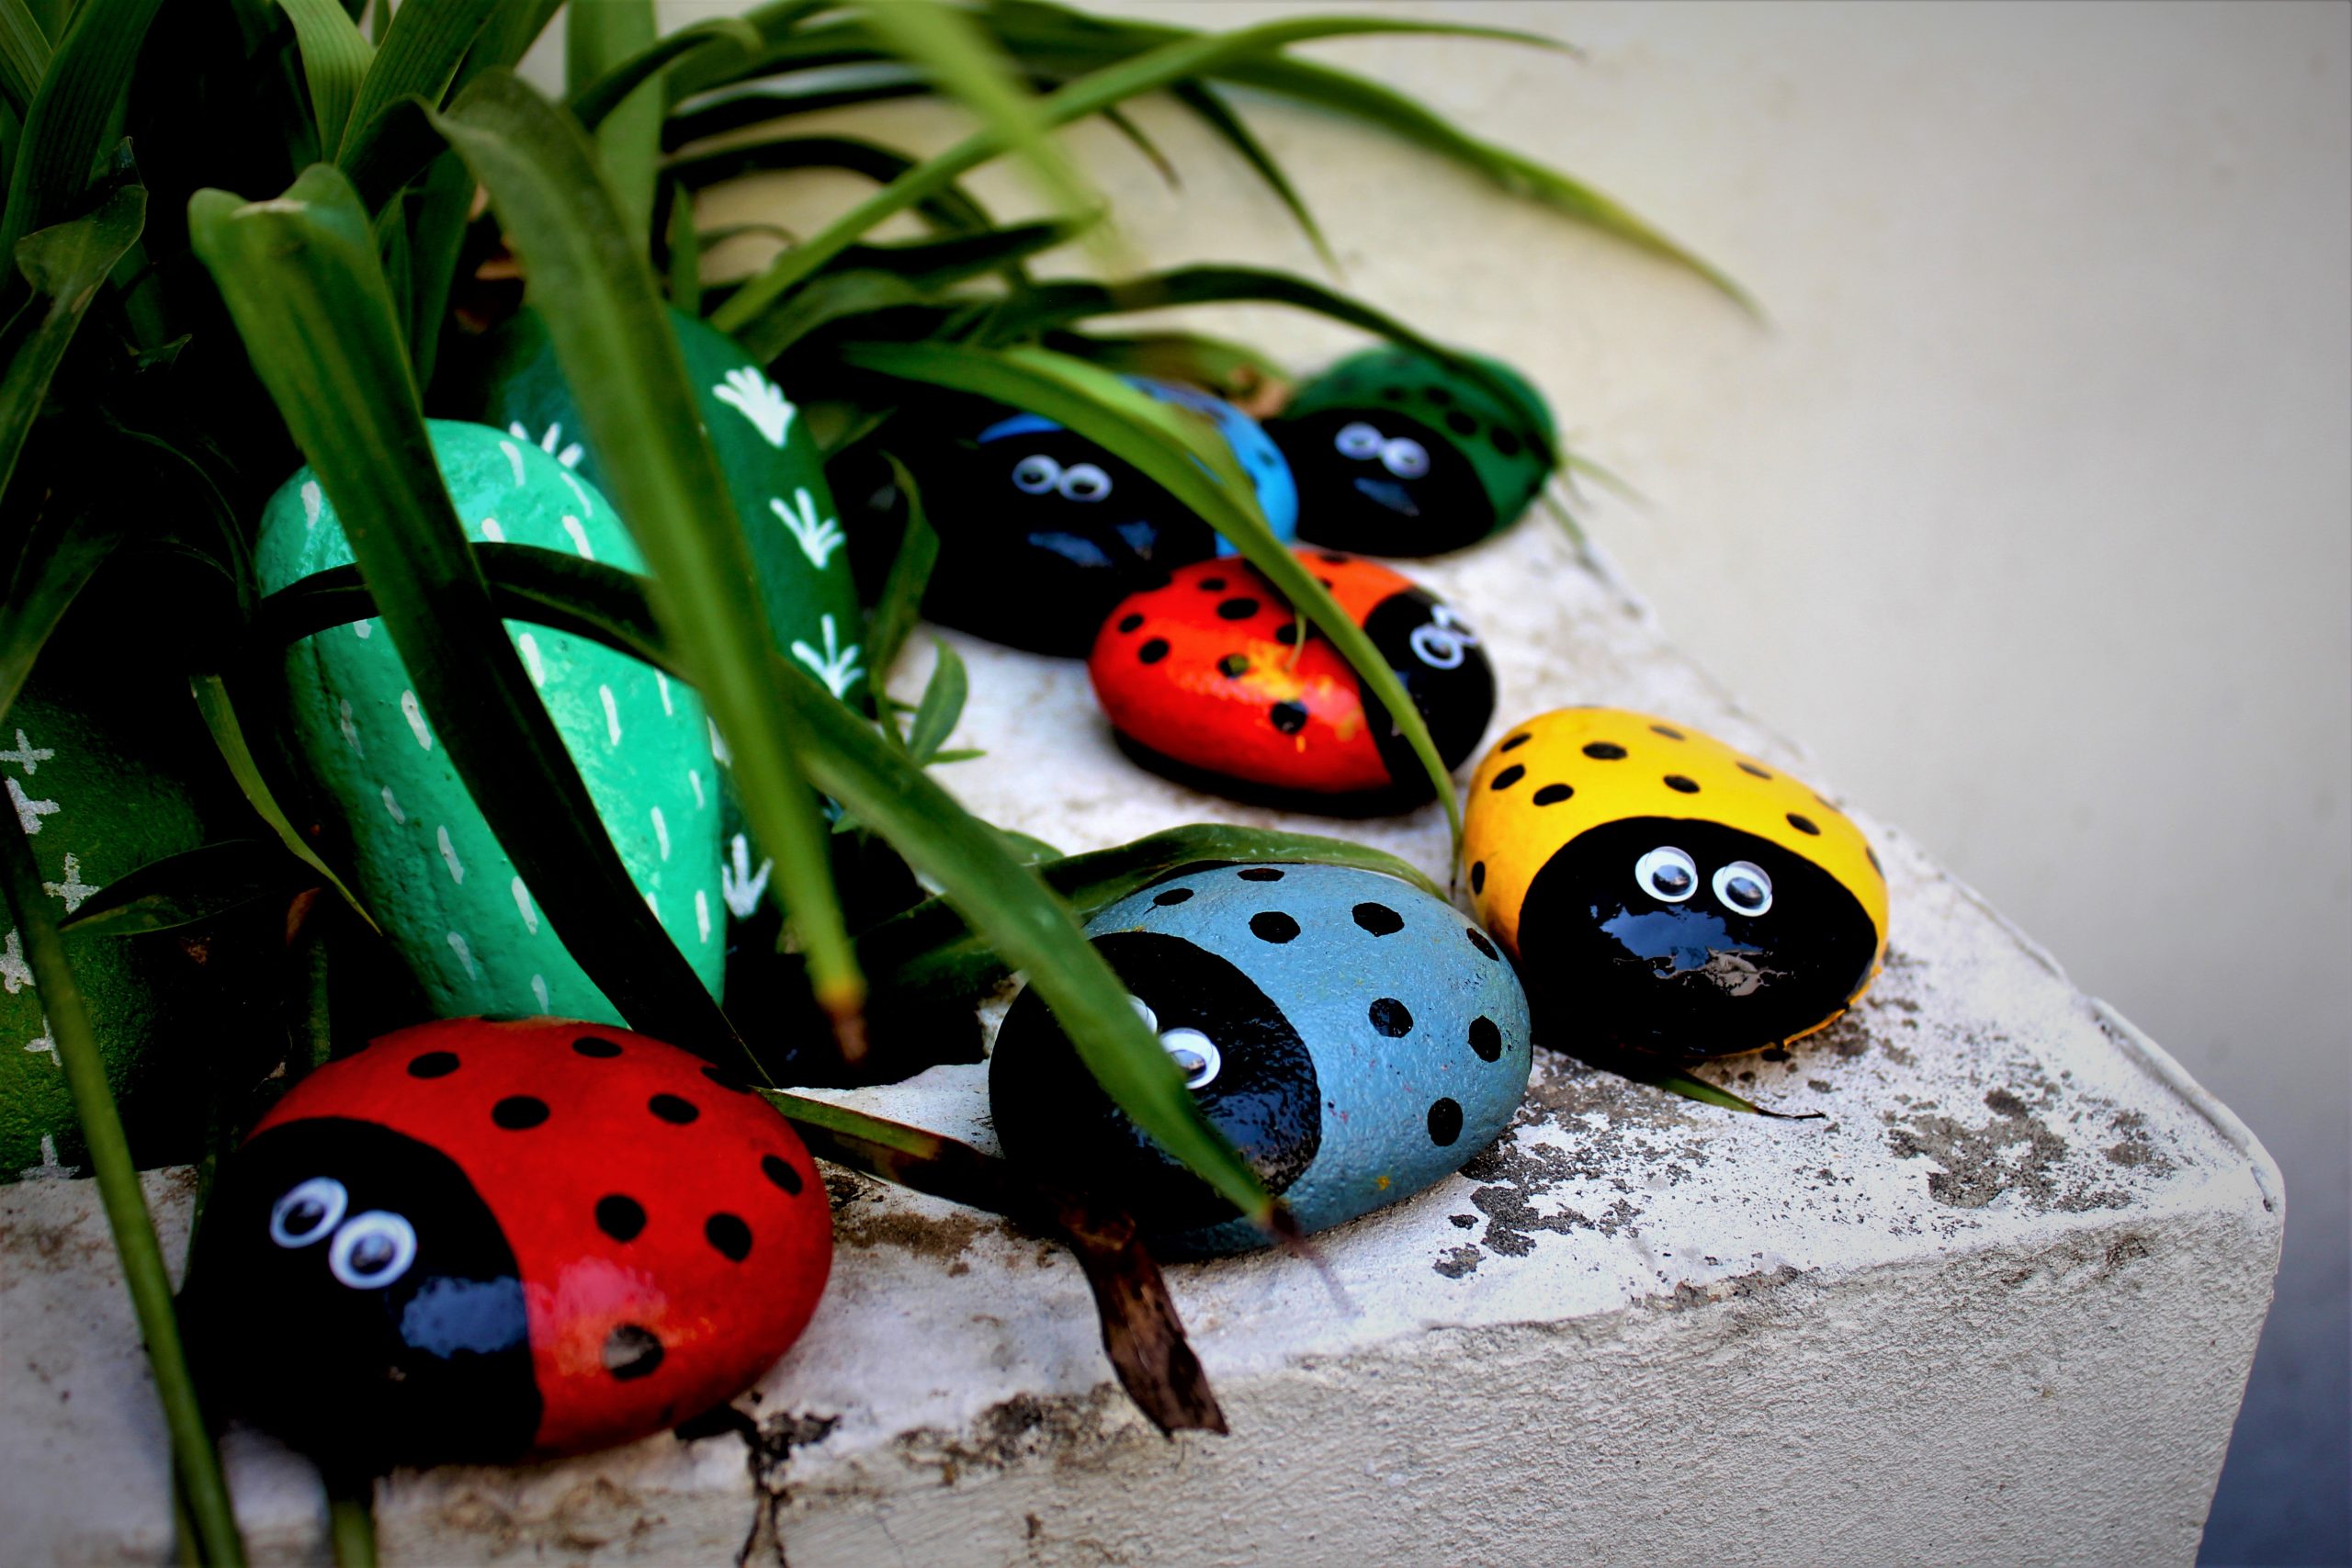 Artificial ladybug insects